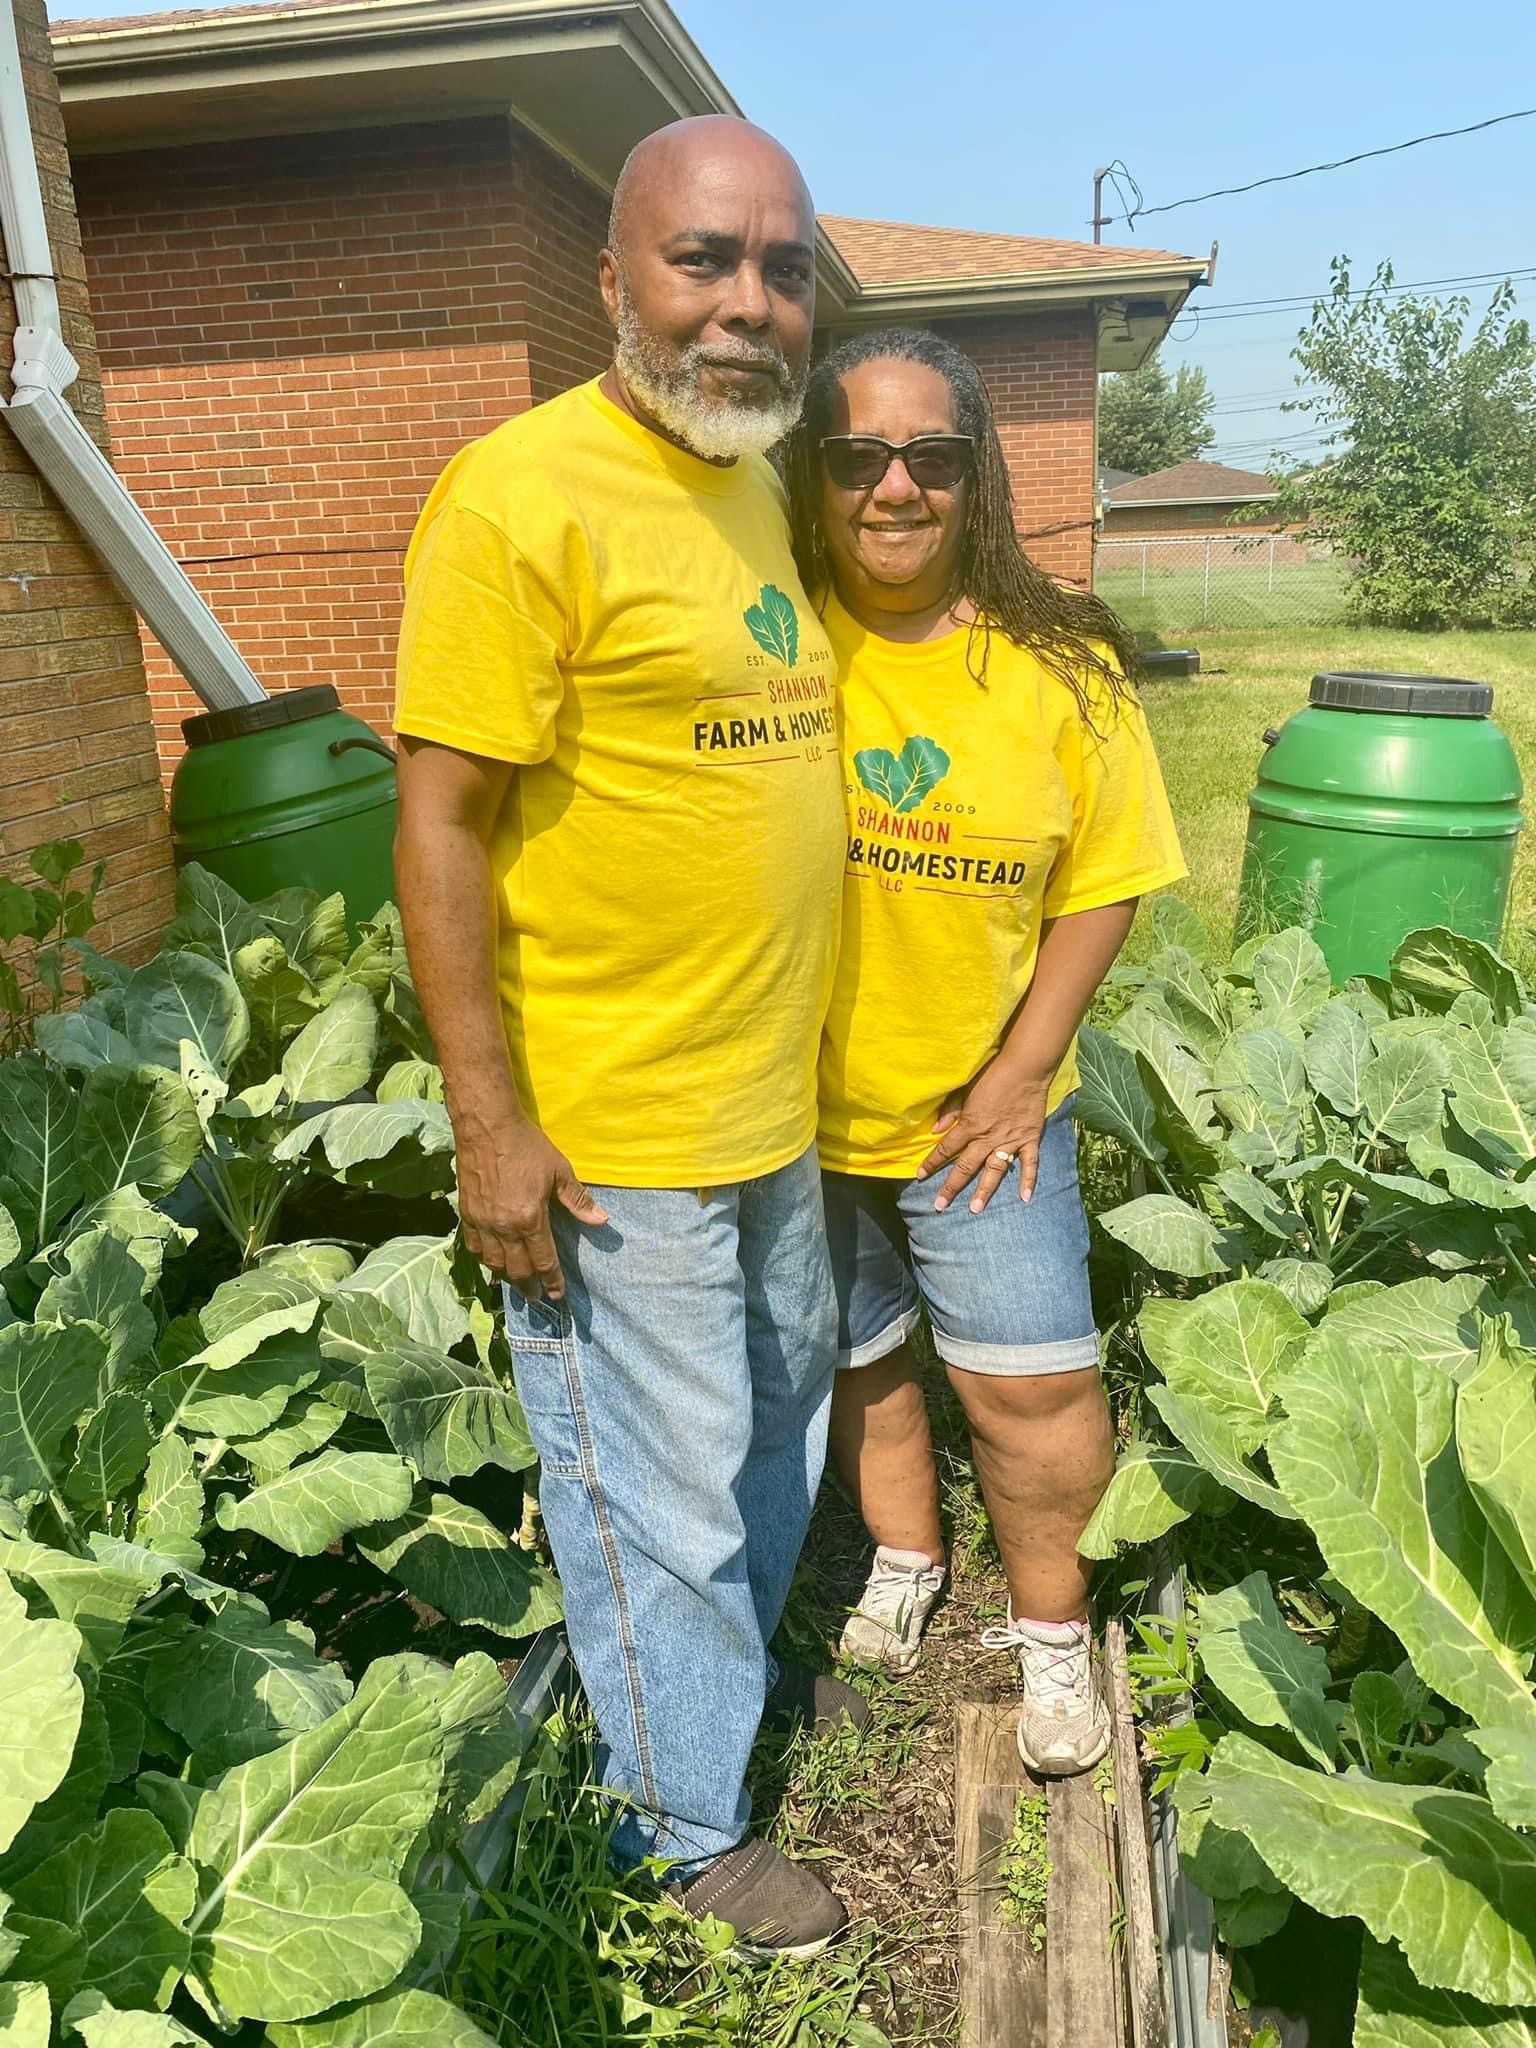 Man and woman stand with yellow shirts in front of raised garden beds.